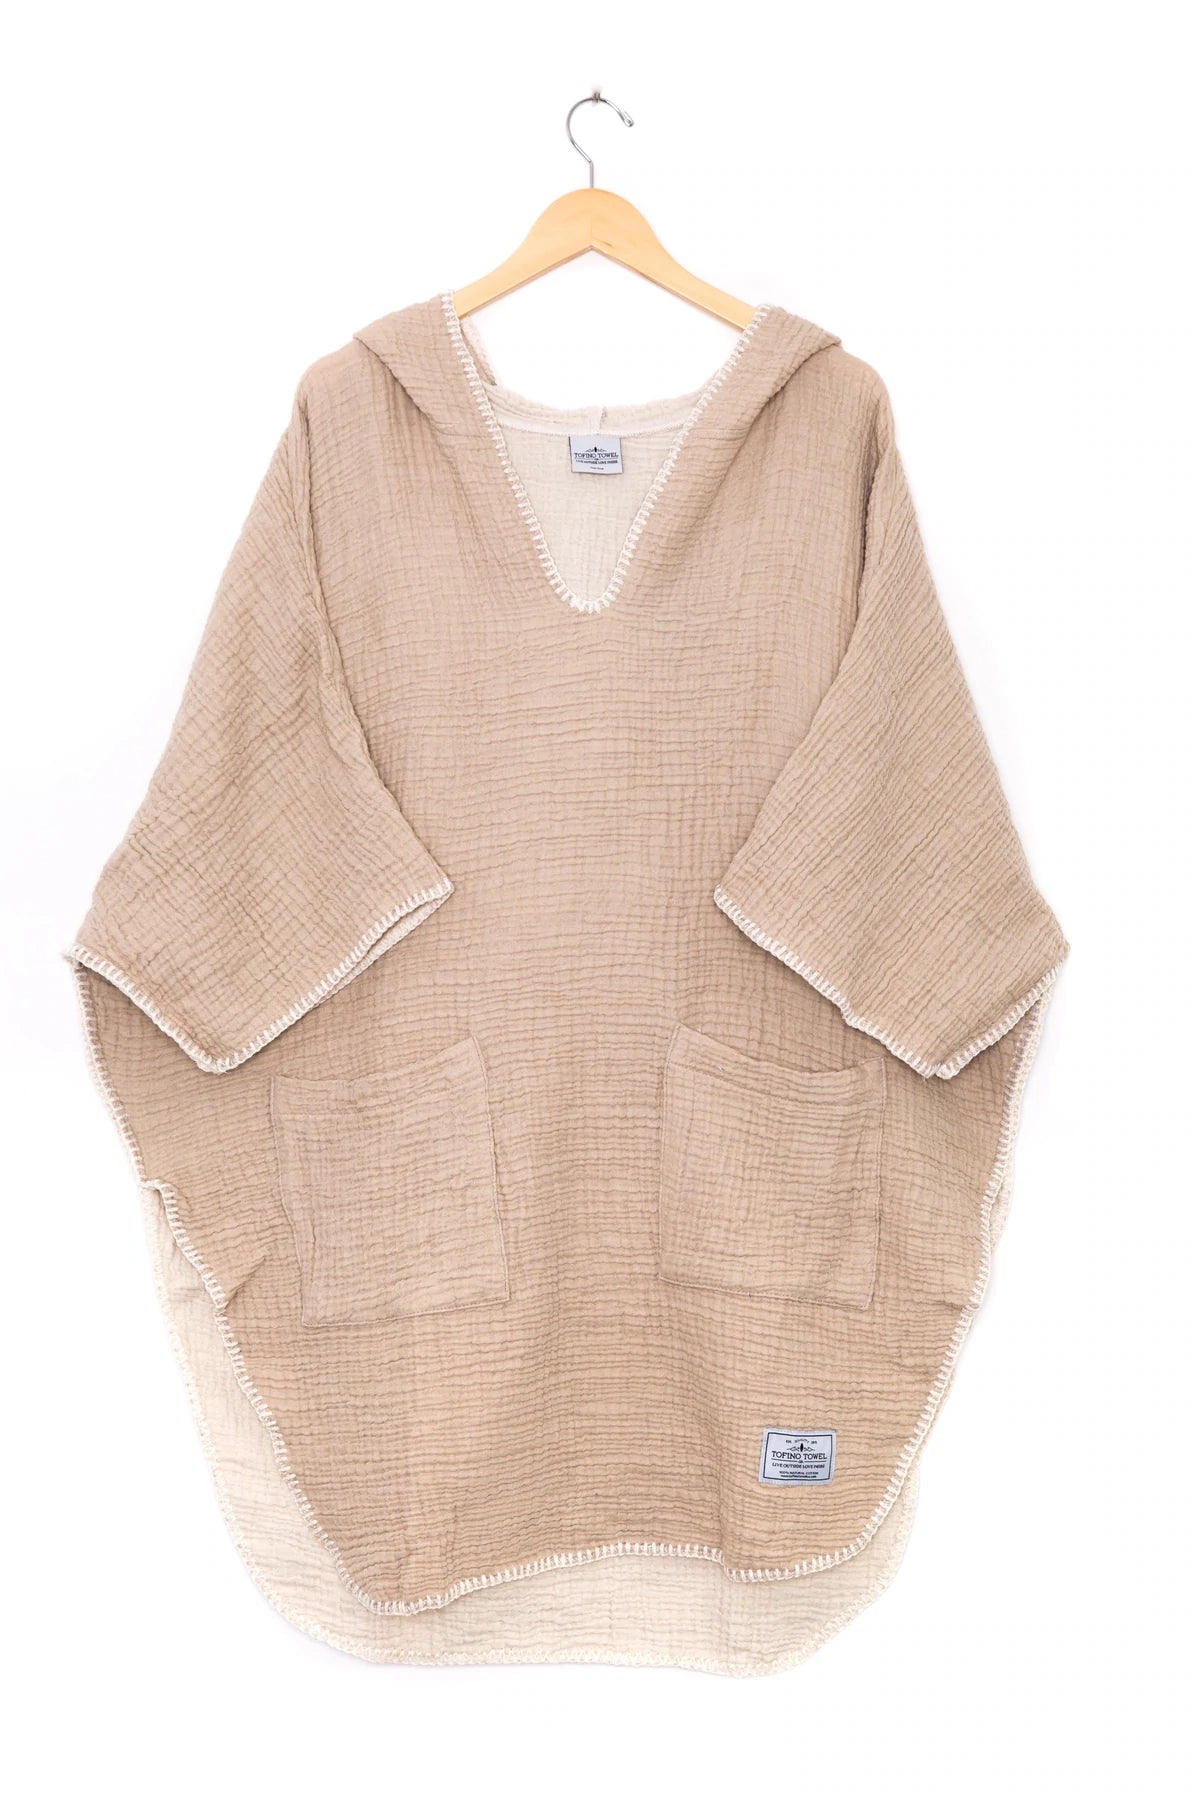 Cocoon Surf Poncho-Women's